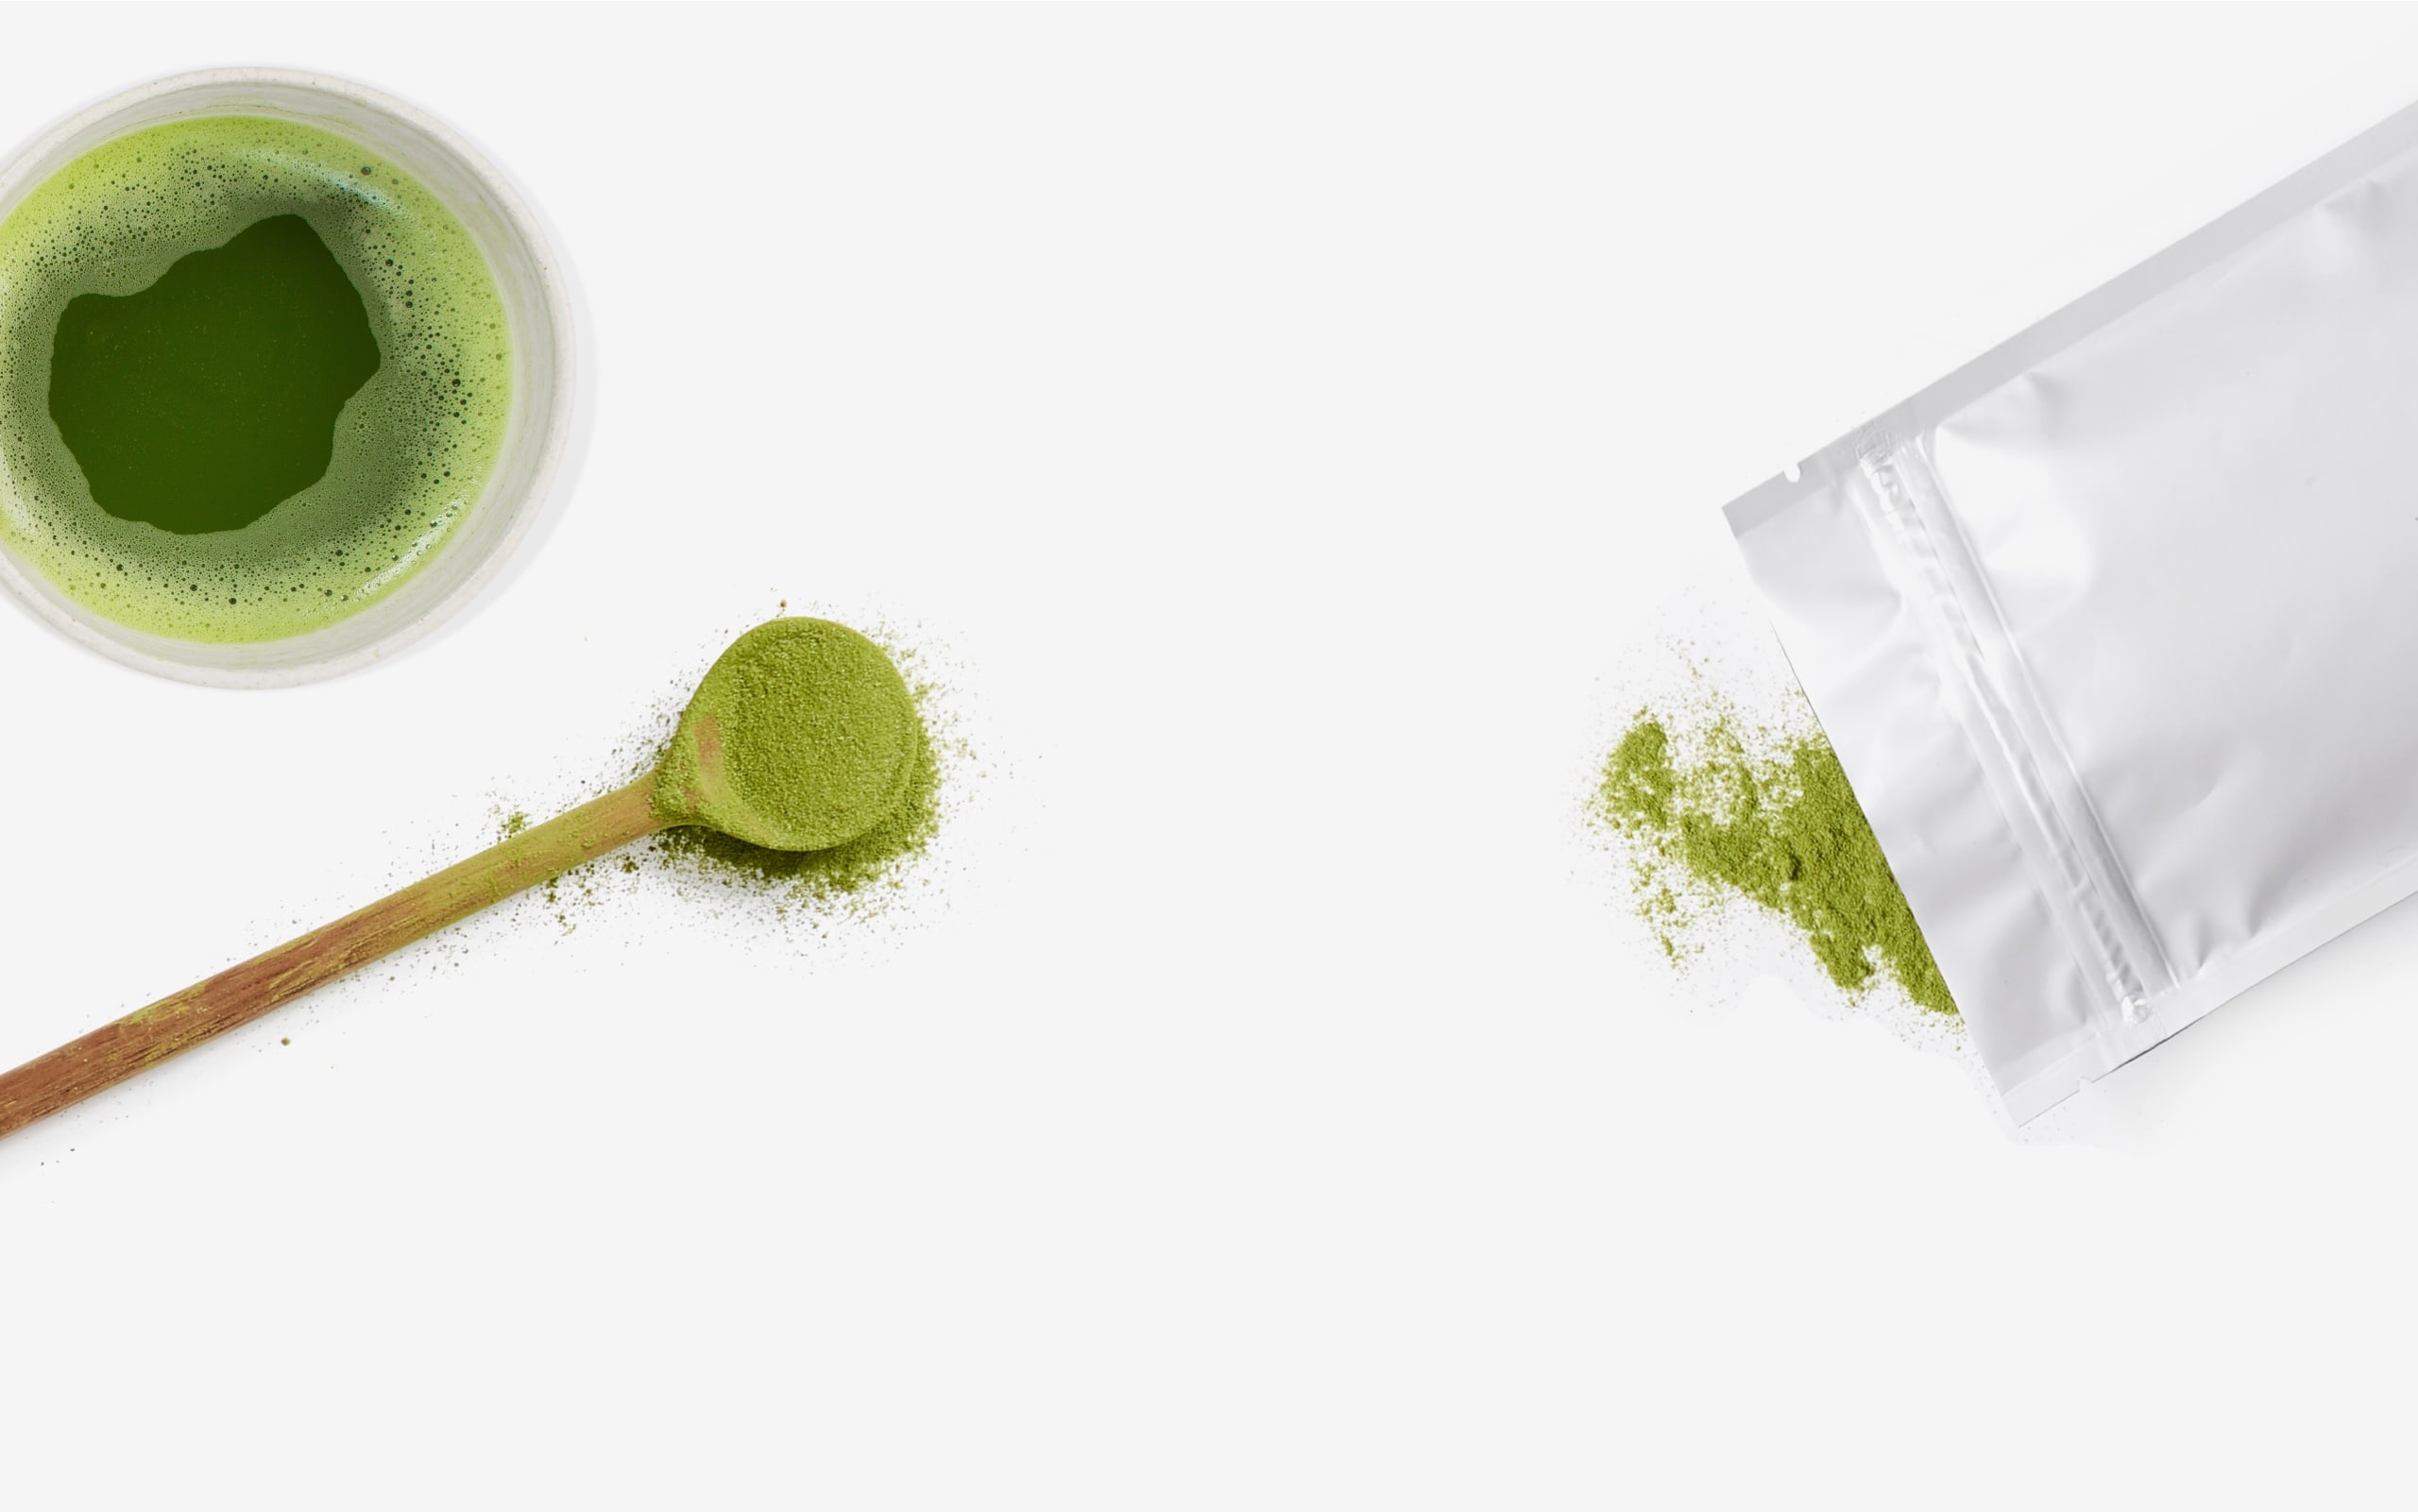 A cup filled with matcha next to a wooden spoon and bag filled with matcha.